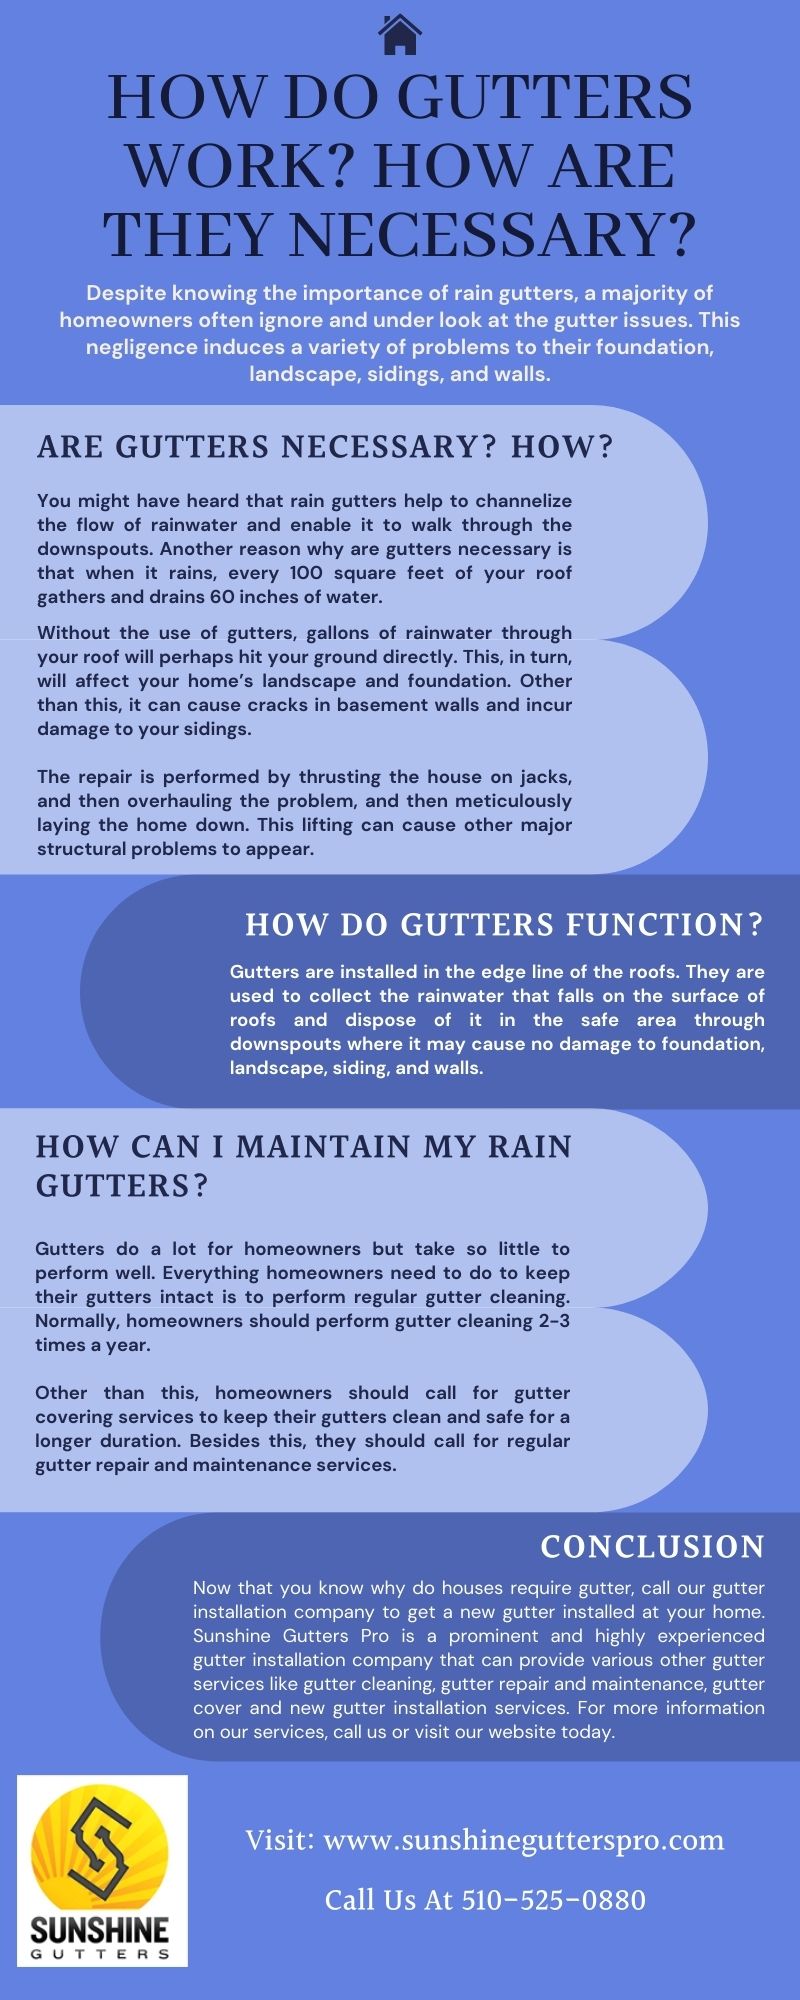 How Do Gutters Work? How Are They Necessary?